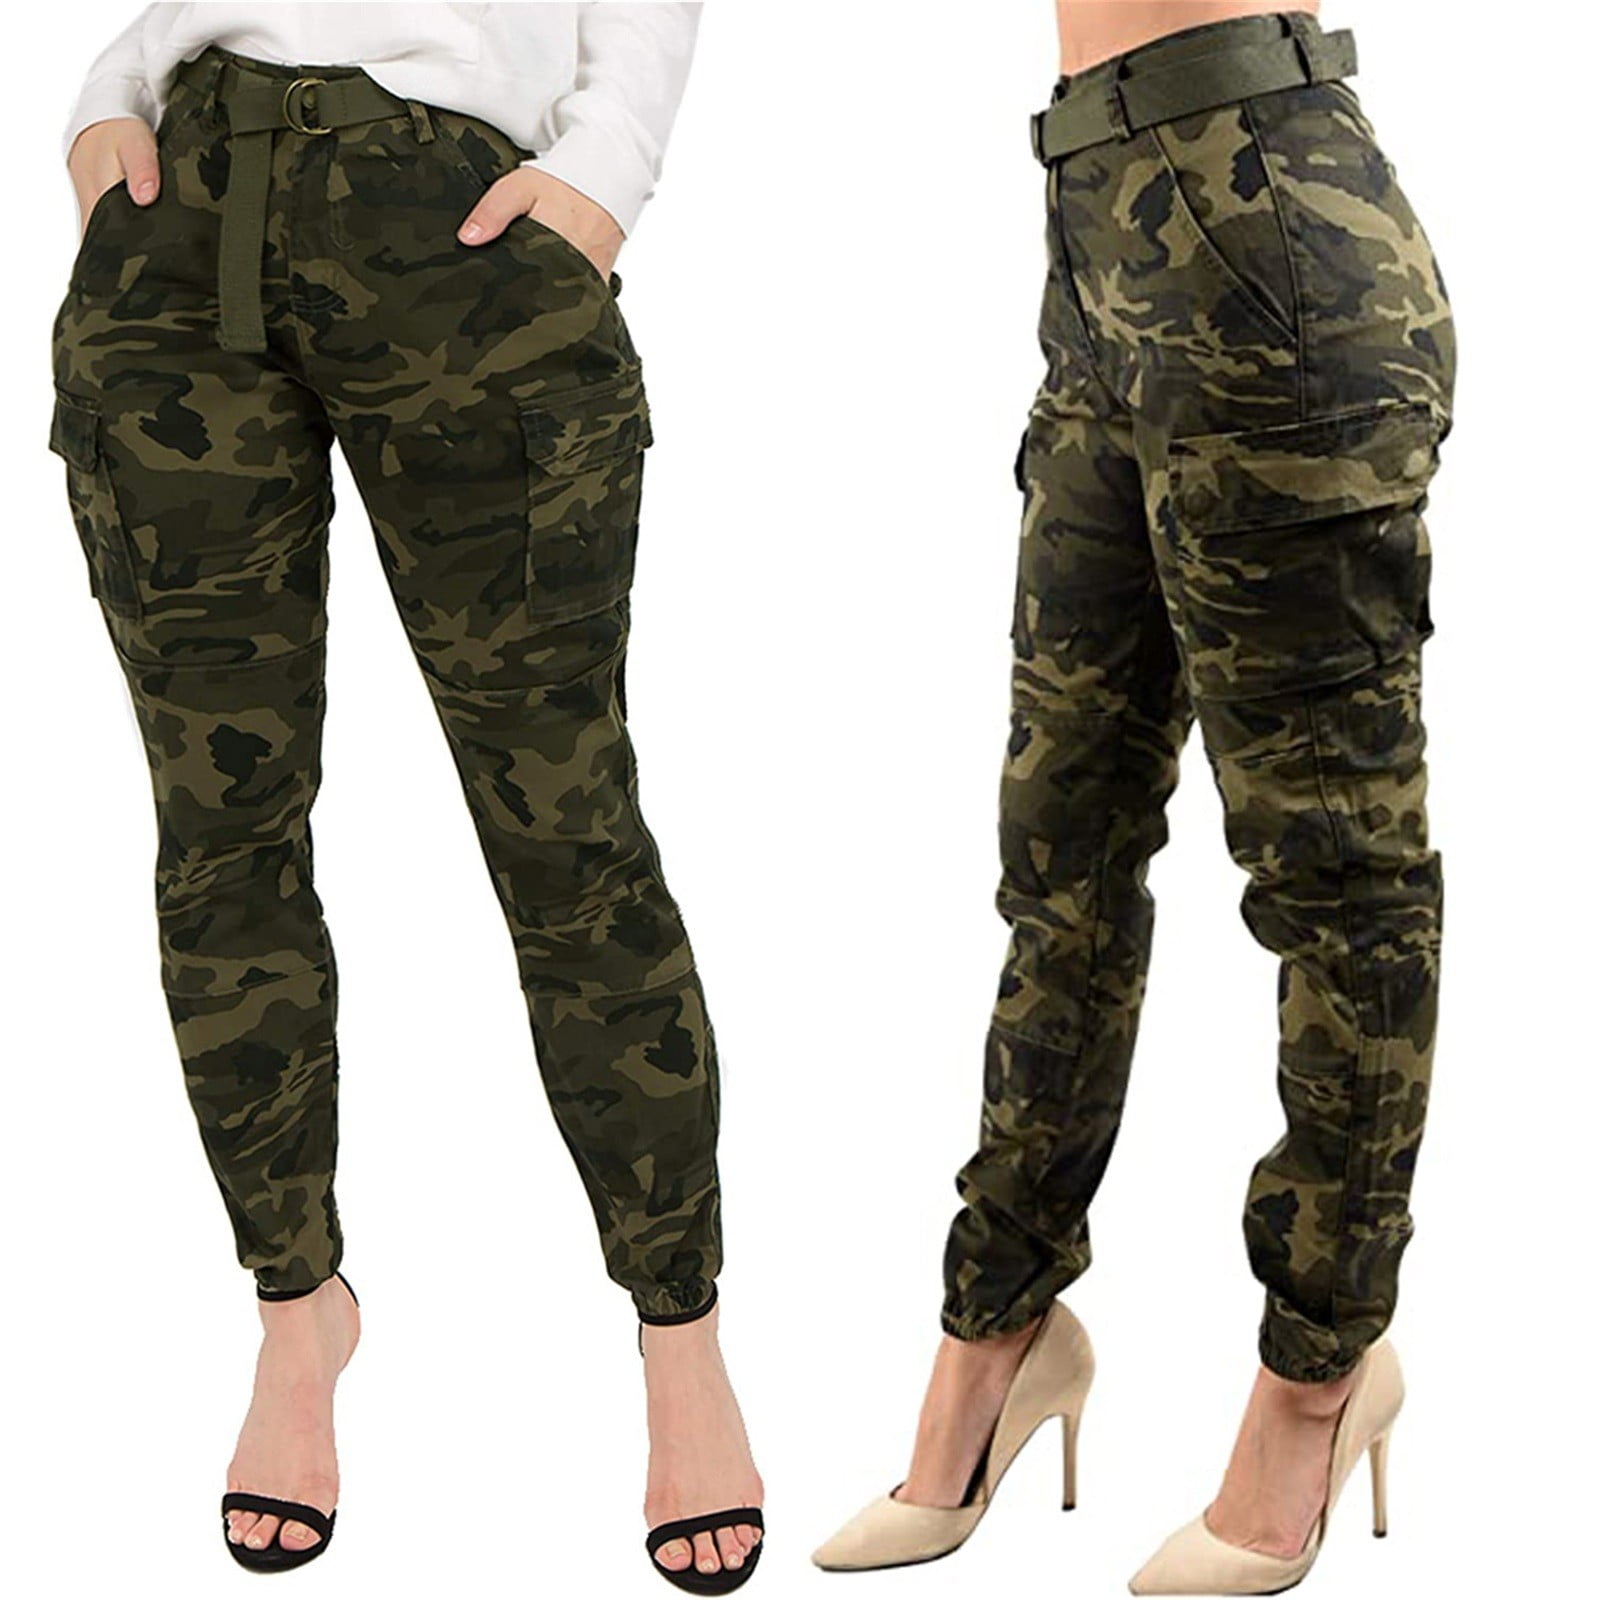 FAFWYP Women's Plus Size Cargo Pants, Casual Outdoor Camouflage Trousers High Multi-pockets Slim Fit Athletic Jogger Pants Baggy Workout Sweatpants with Matching Belt Clearance - Walmart.com